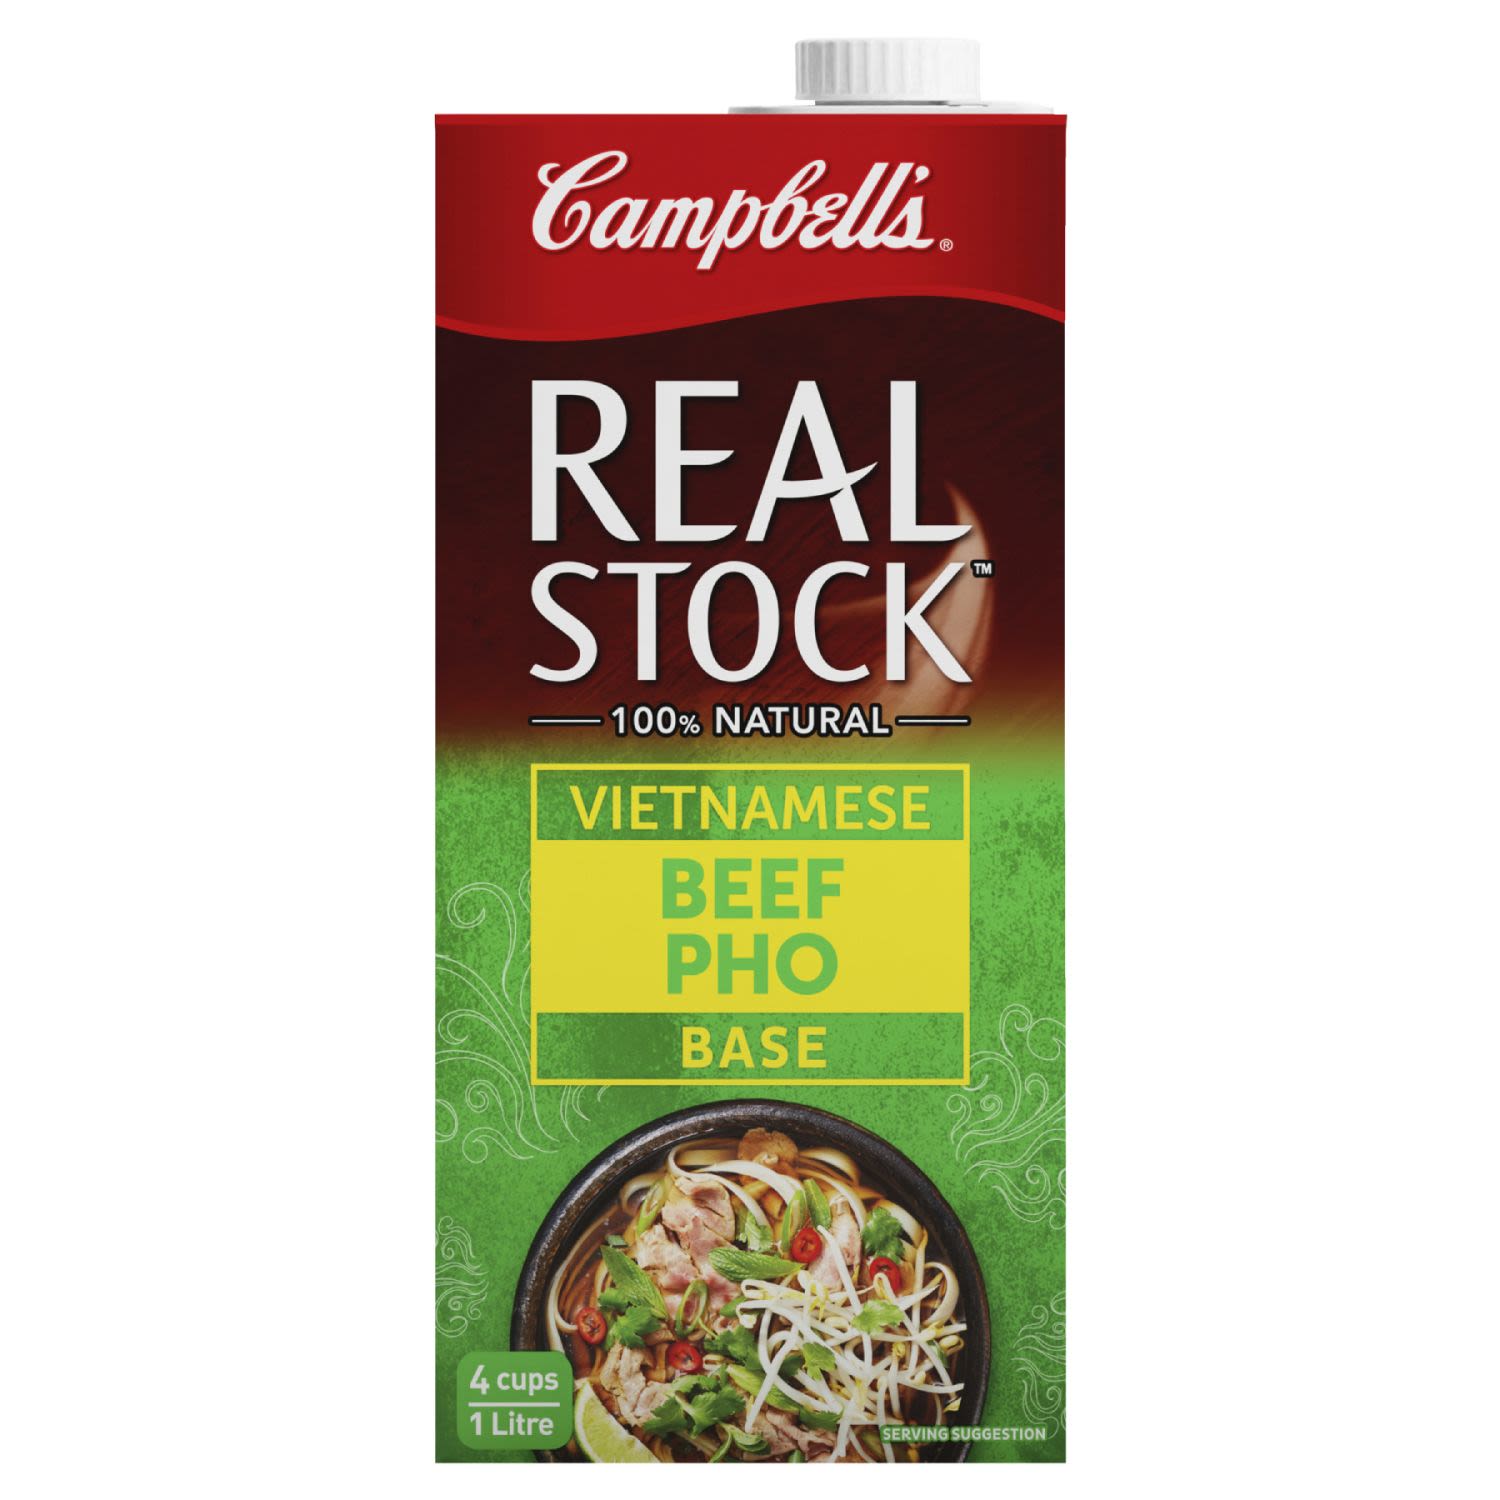 Campbell's Real Stock Vietnamese Beef Pho Base, 1 Litre